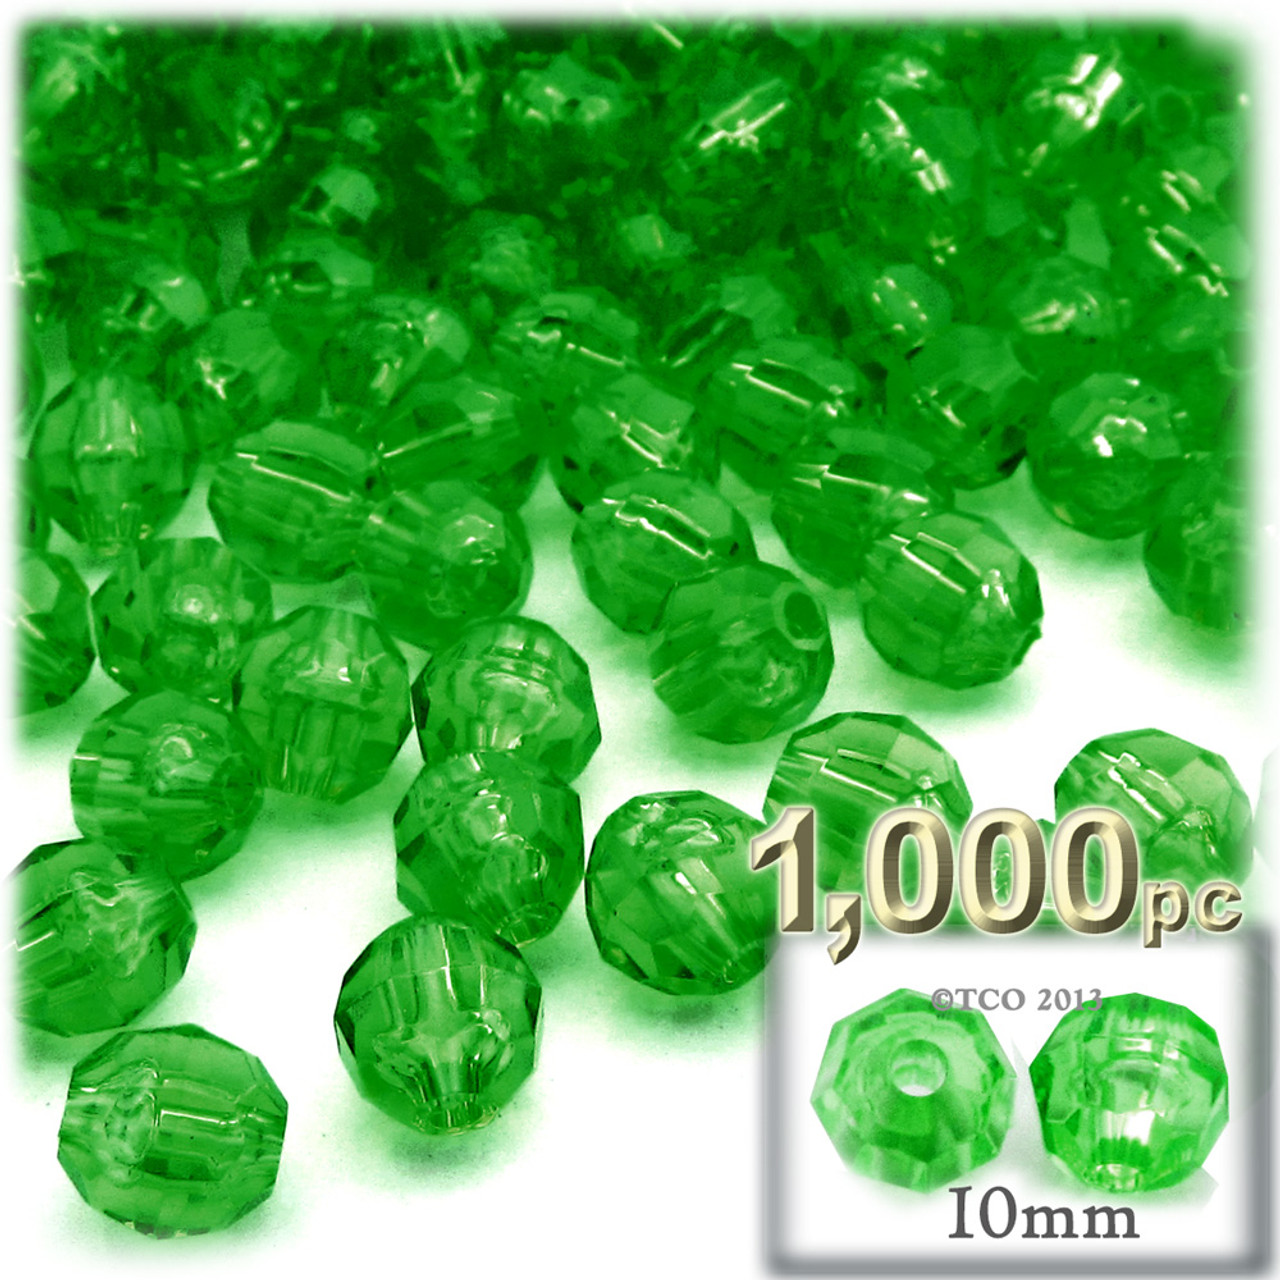 Trimits Wooden Craft Beads - Round - 25mm - Green (Pack of 9